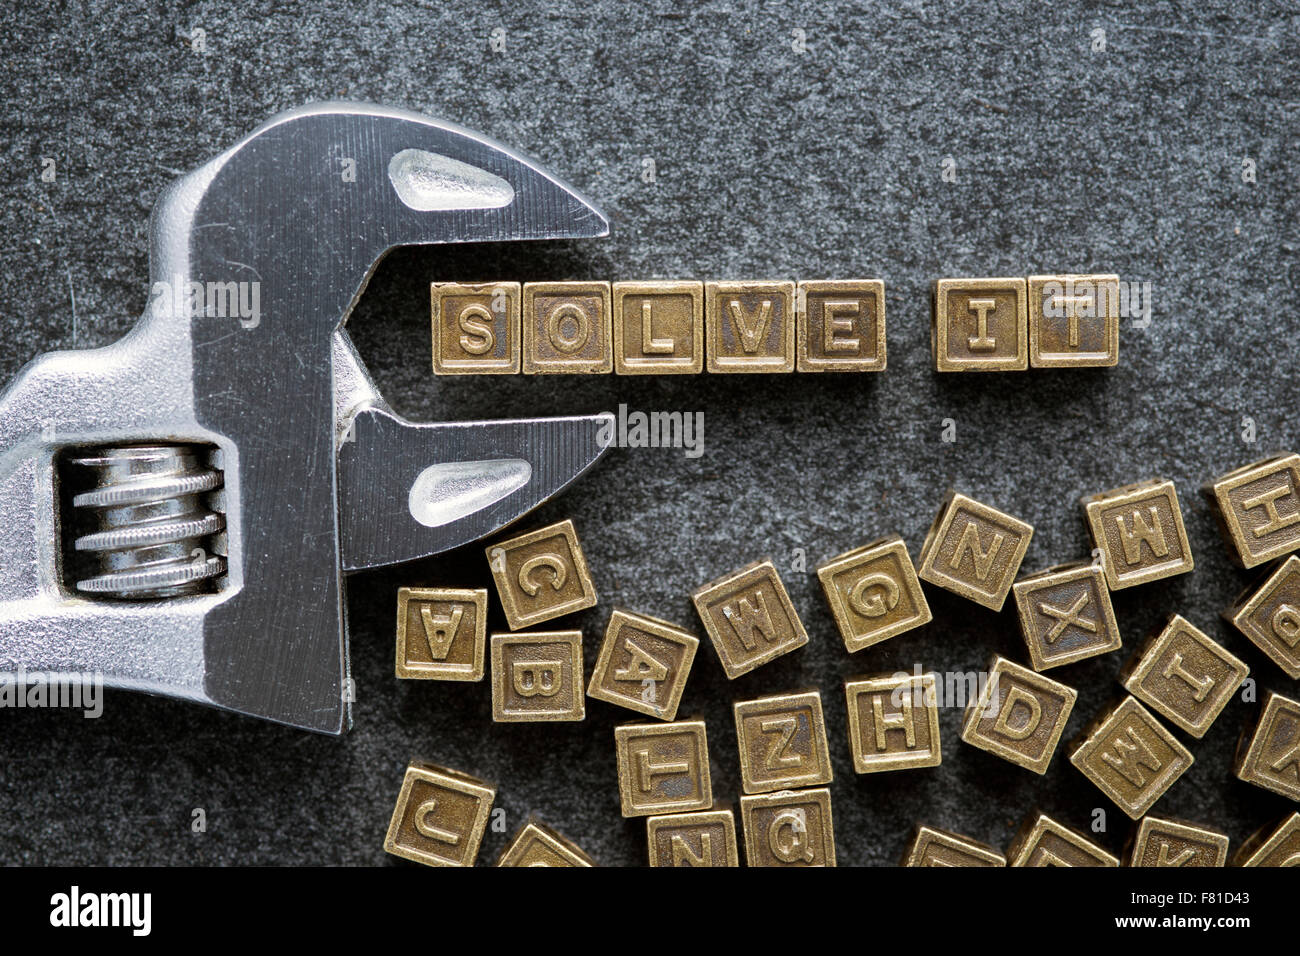 solve it slogan made from metallic toy blocks with adjustable wrench on blackboard surface Stock Photo